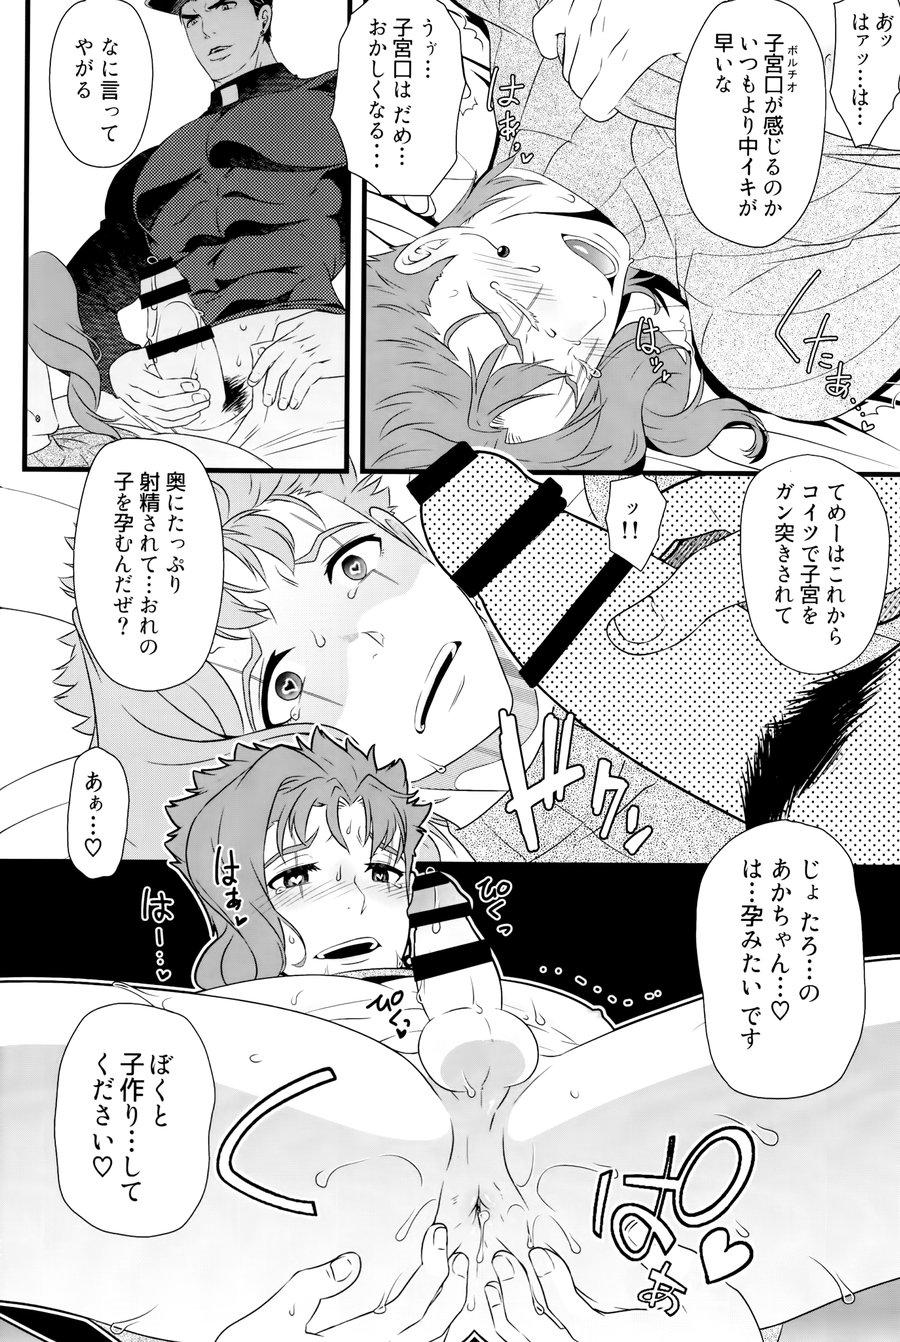 Pierced Trapped in a Room Until We Make a Baby - Jojos bizarre adventure | jojo no kimyou na bouken Farting - Page 7